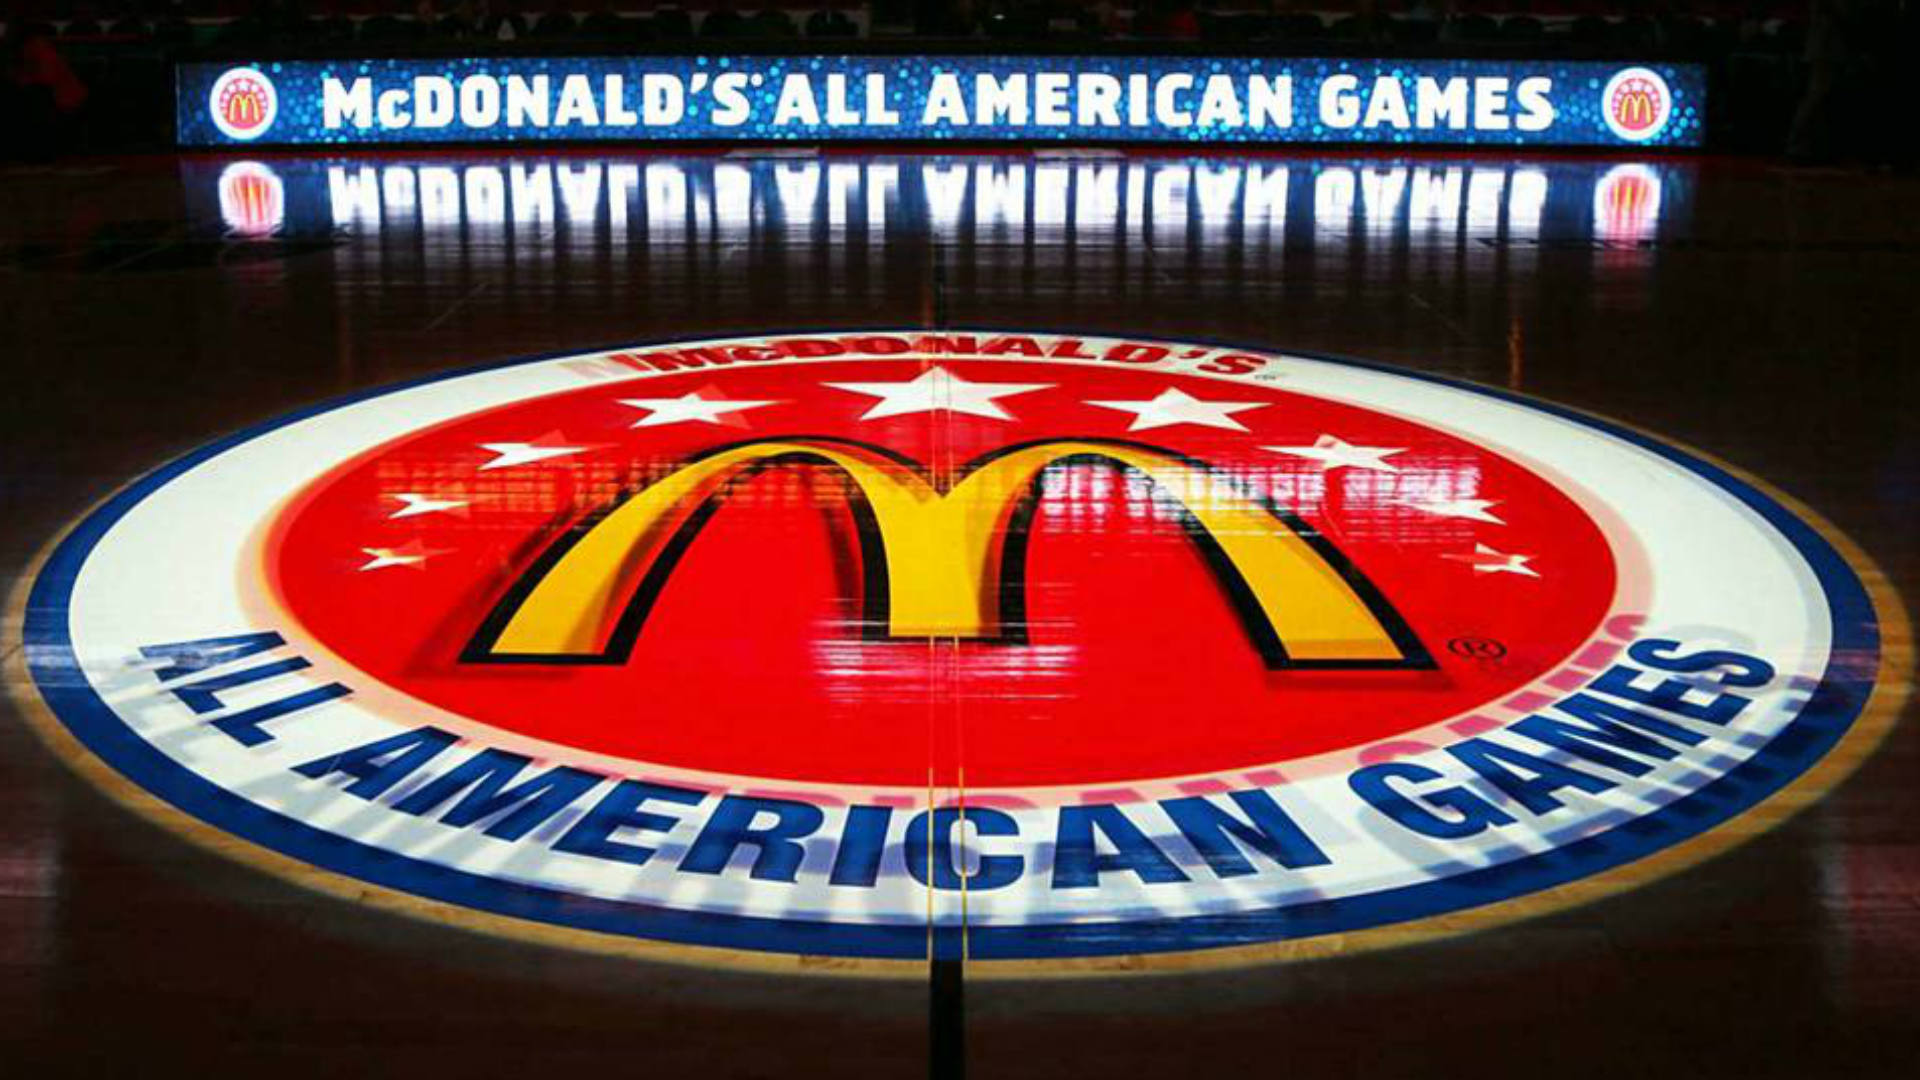 McDonald’s AllAmerican Game 2019 Complete rosters, tipoff time, how